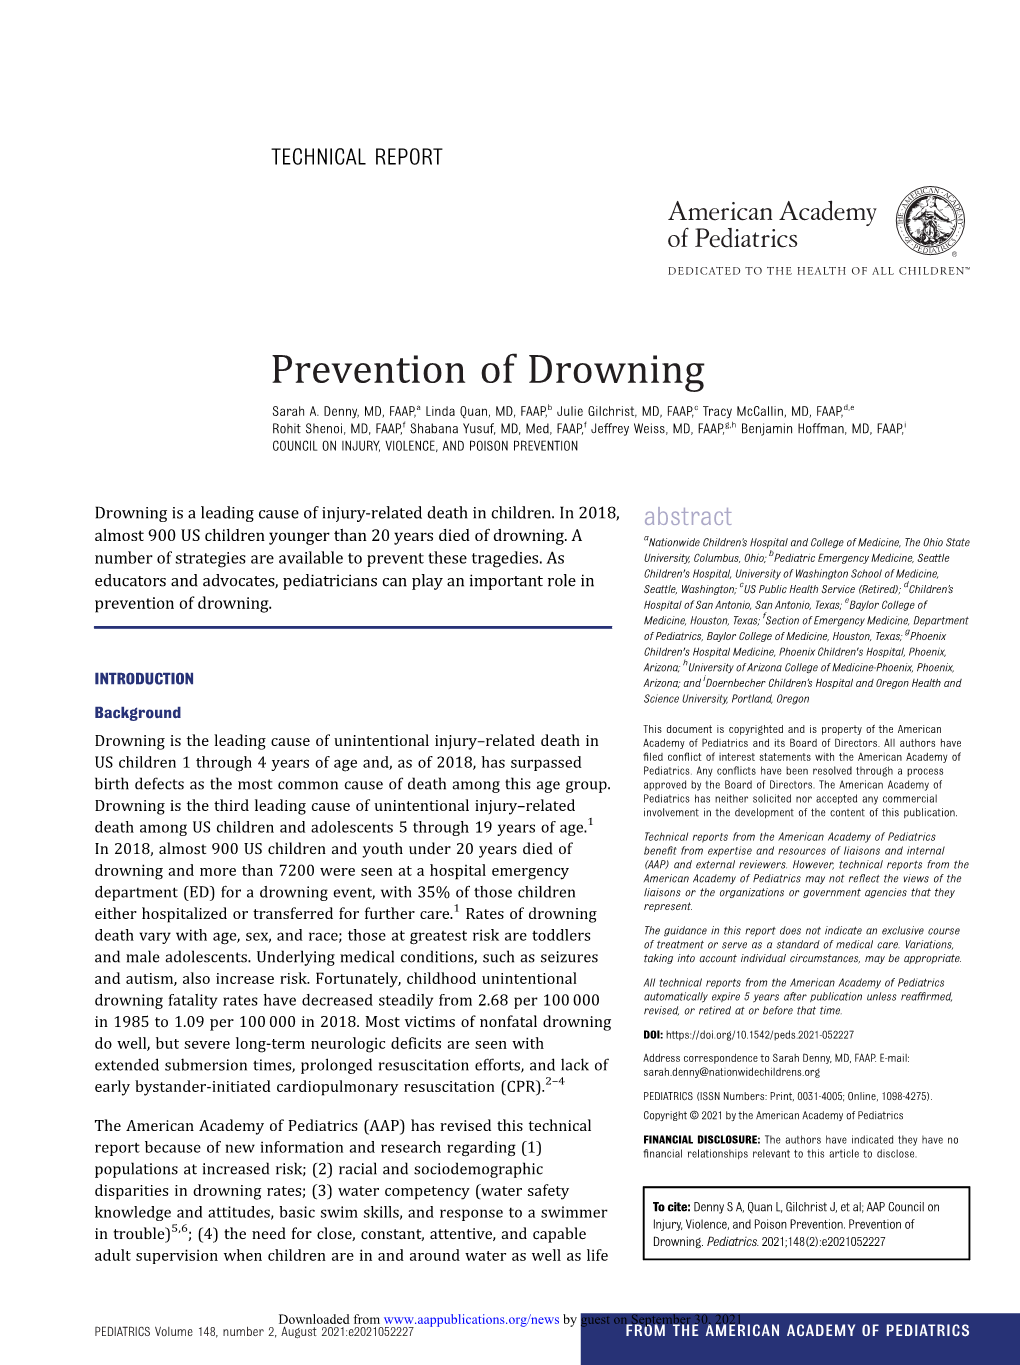 Prevention of Drowning Sarah A